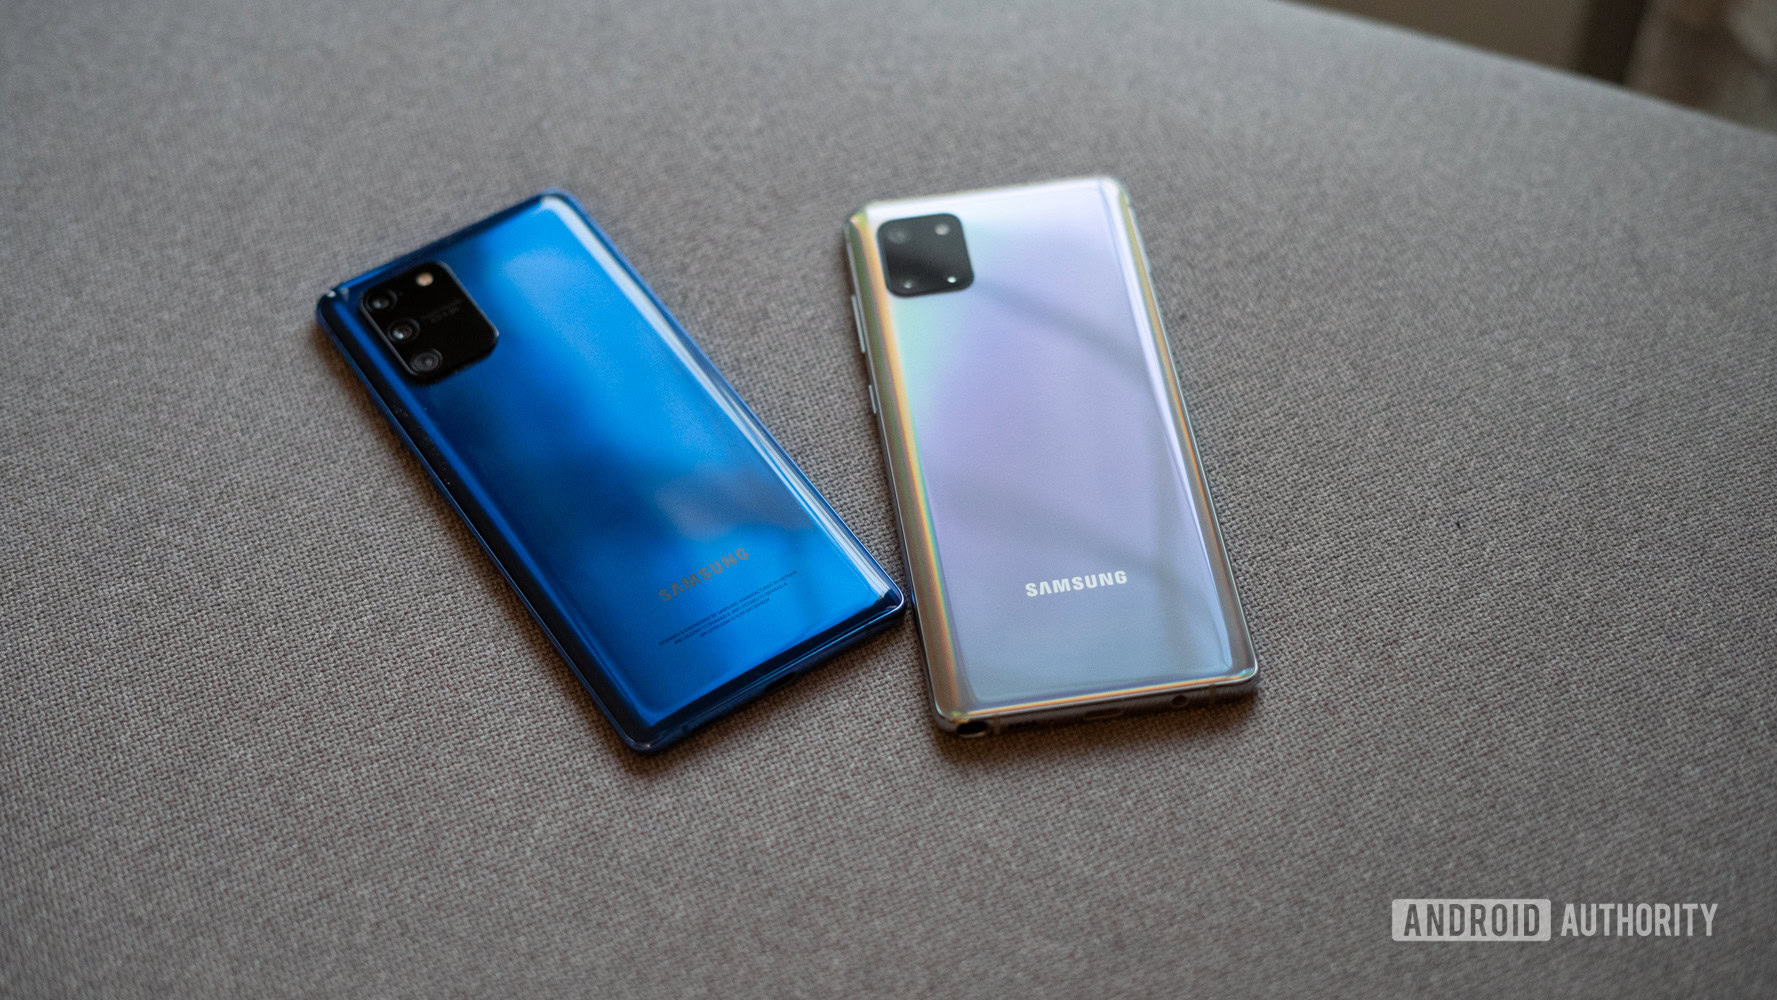 Samsung's new Galaxy S10 Lite and Note 10 Lite phones are deeply